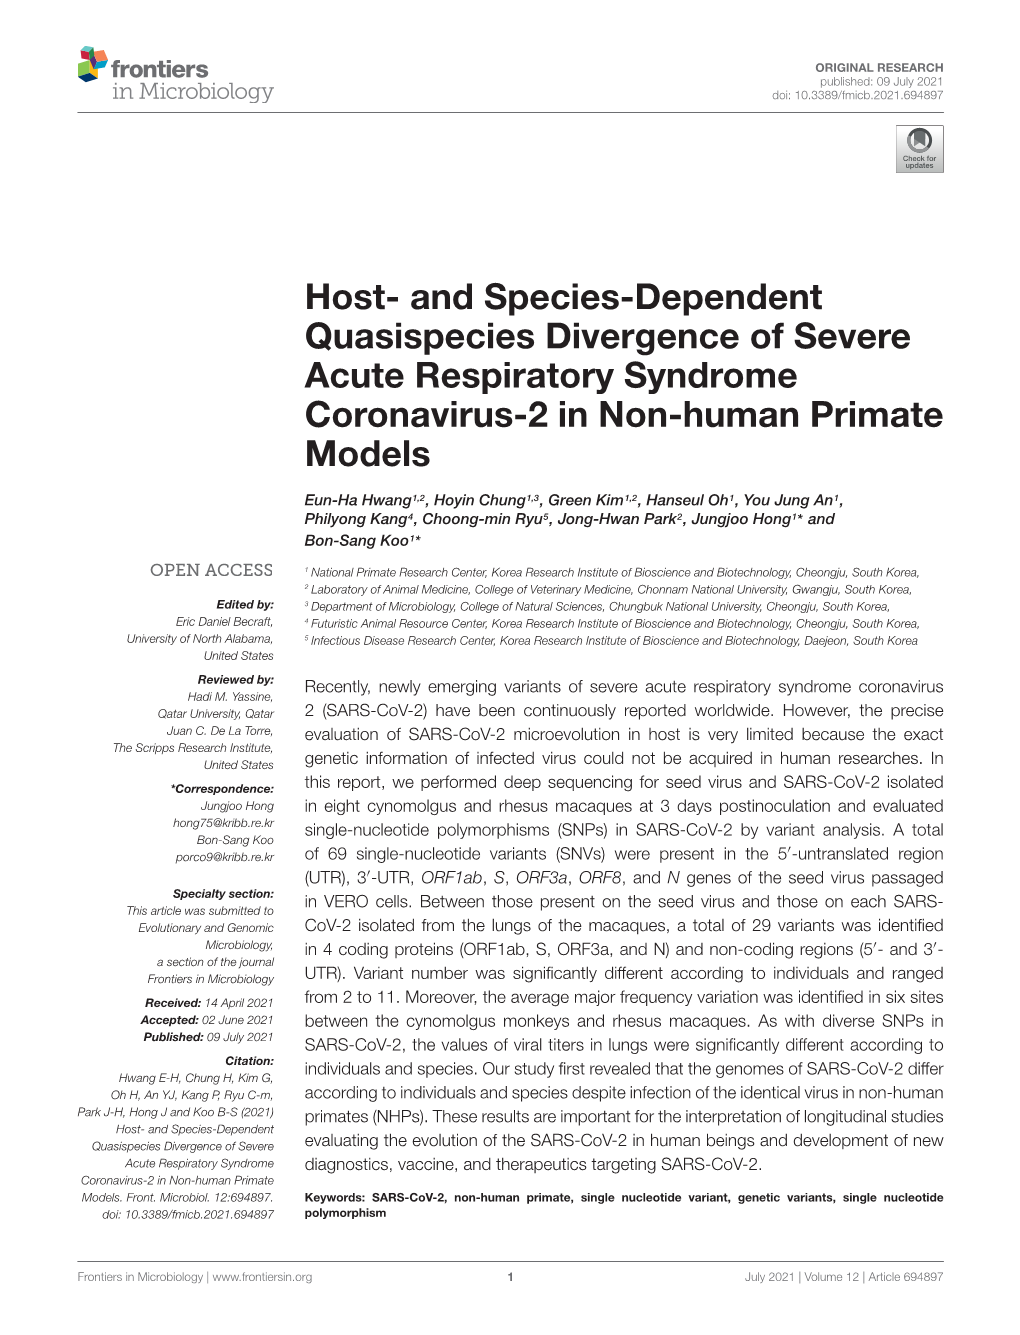 Host- and Species-Dependent Quasispecies Divergence of Severe Acute Respiratory Syndrome Coronavirus-2 in Non-Human Primate Models